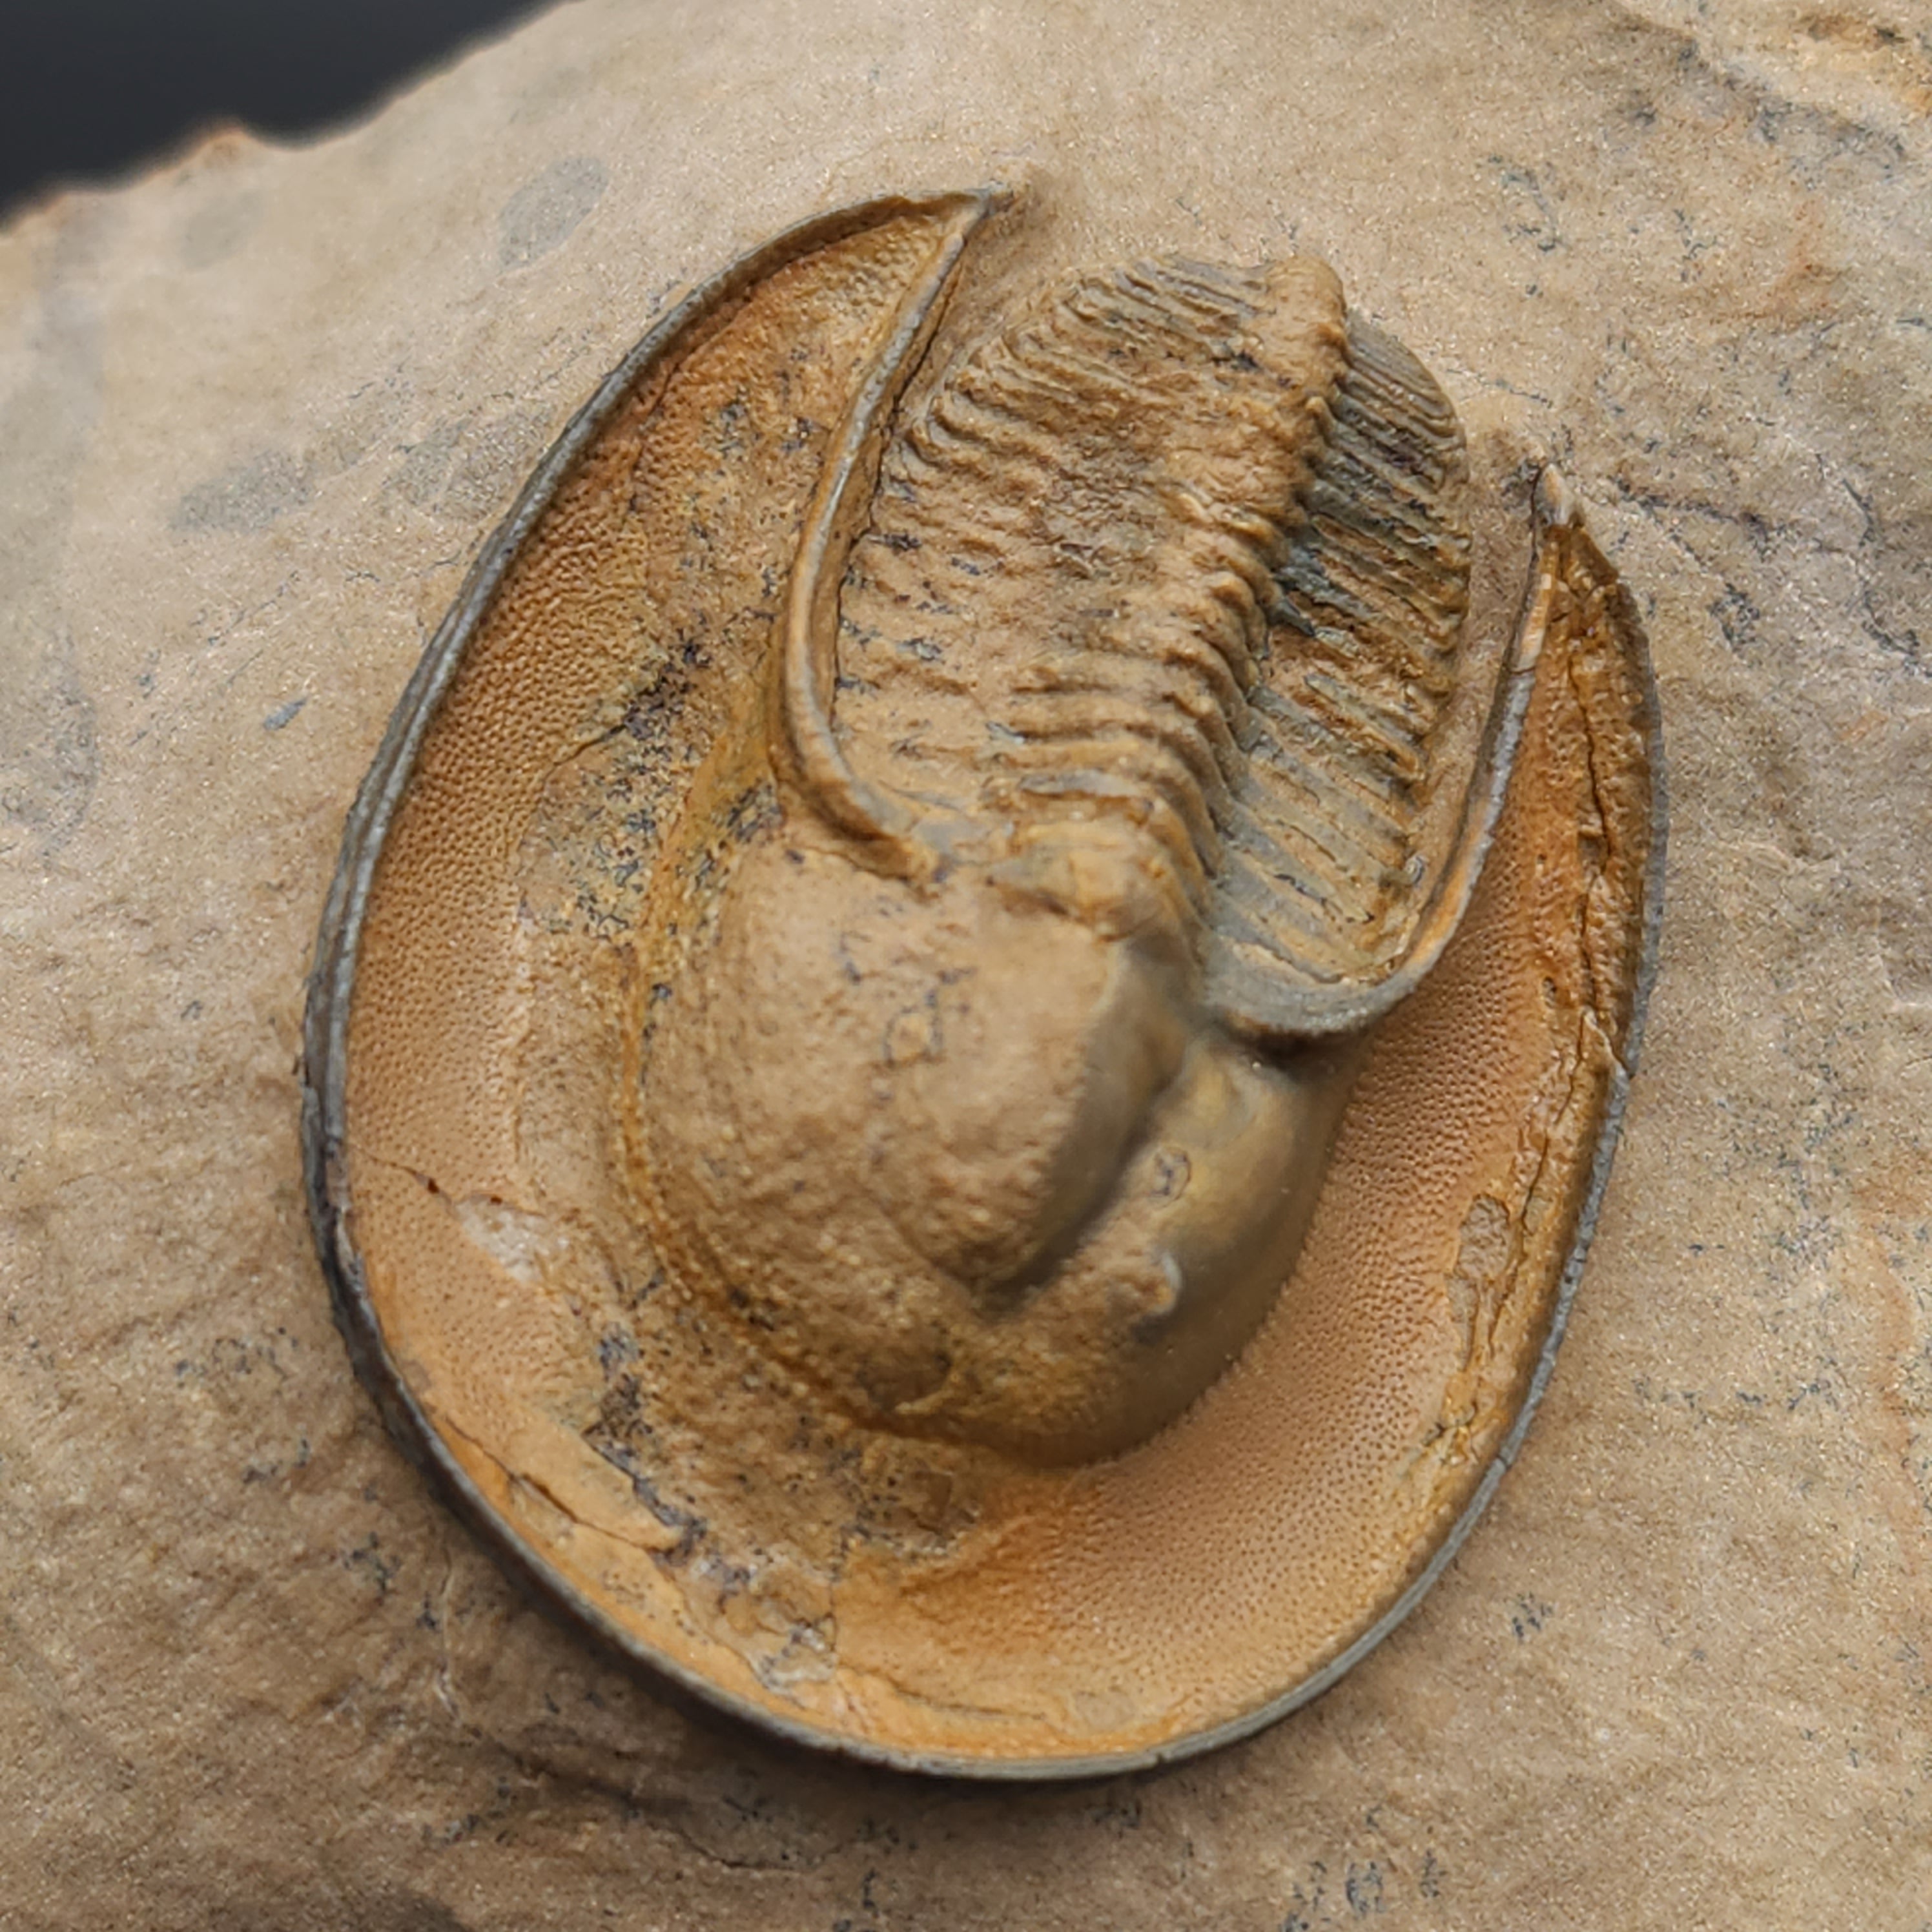 Eoharpes Trilobite Fossil - Devonian Age Harpes species from Ouzina, Morocco